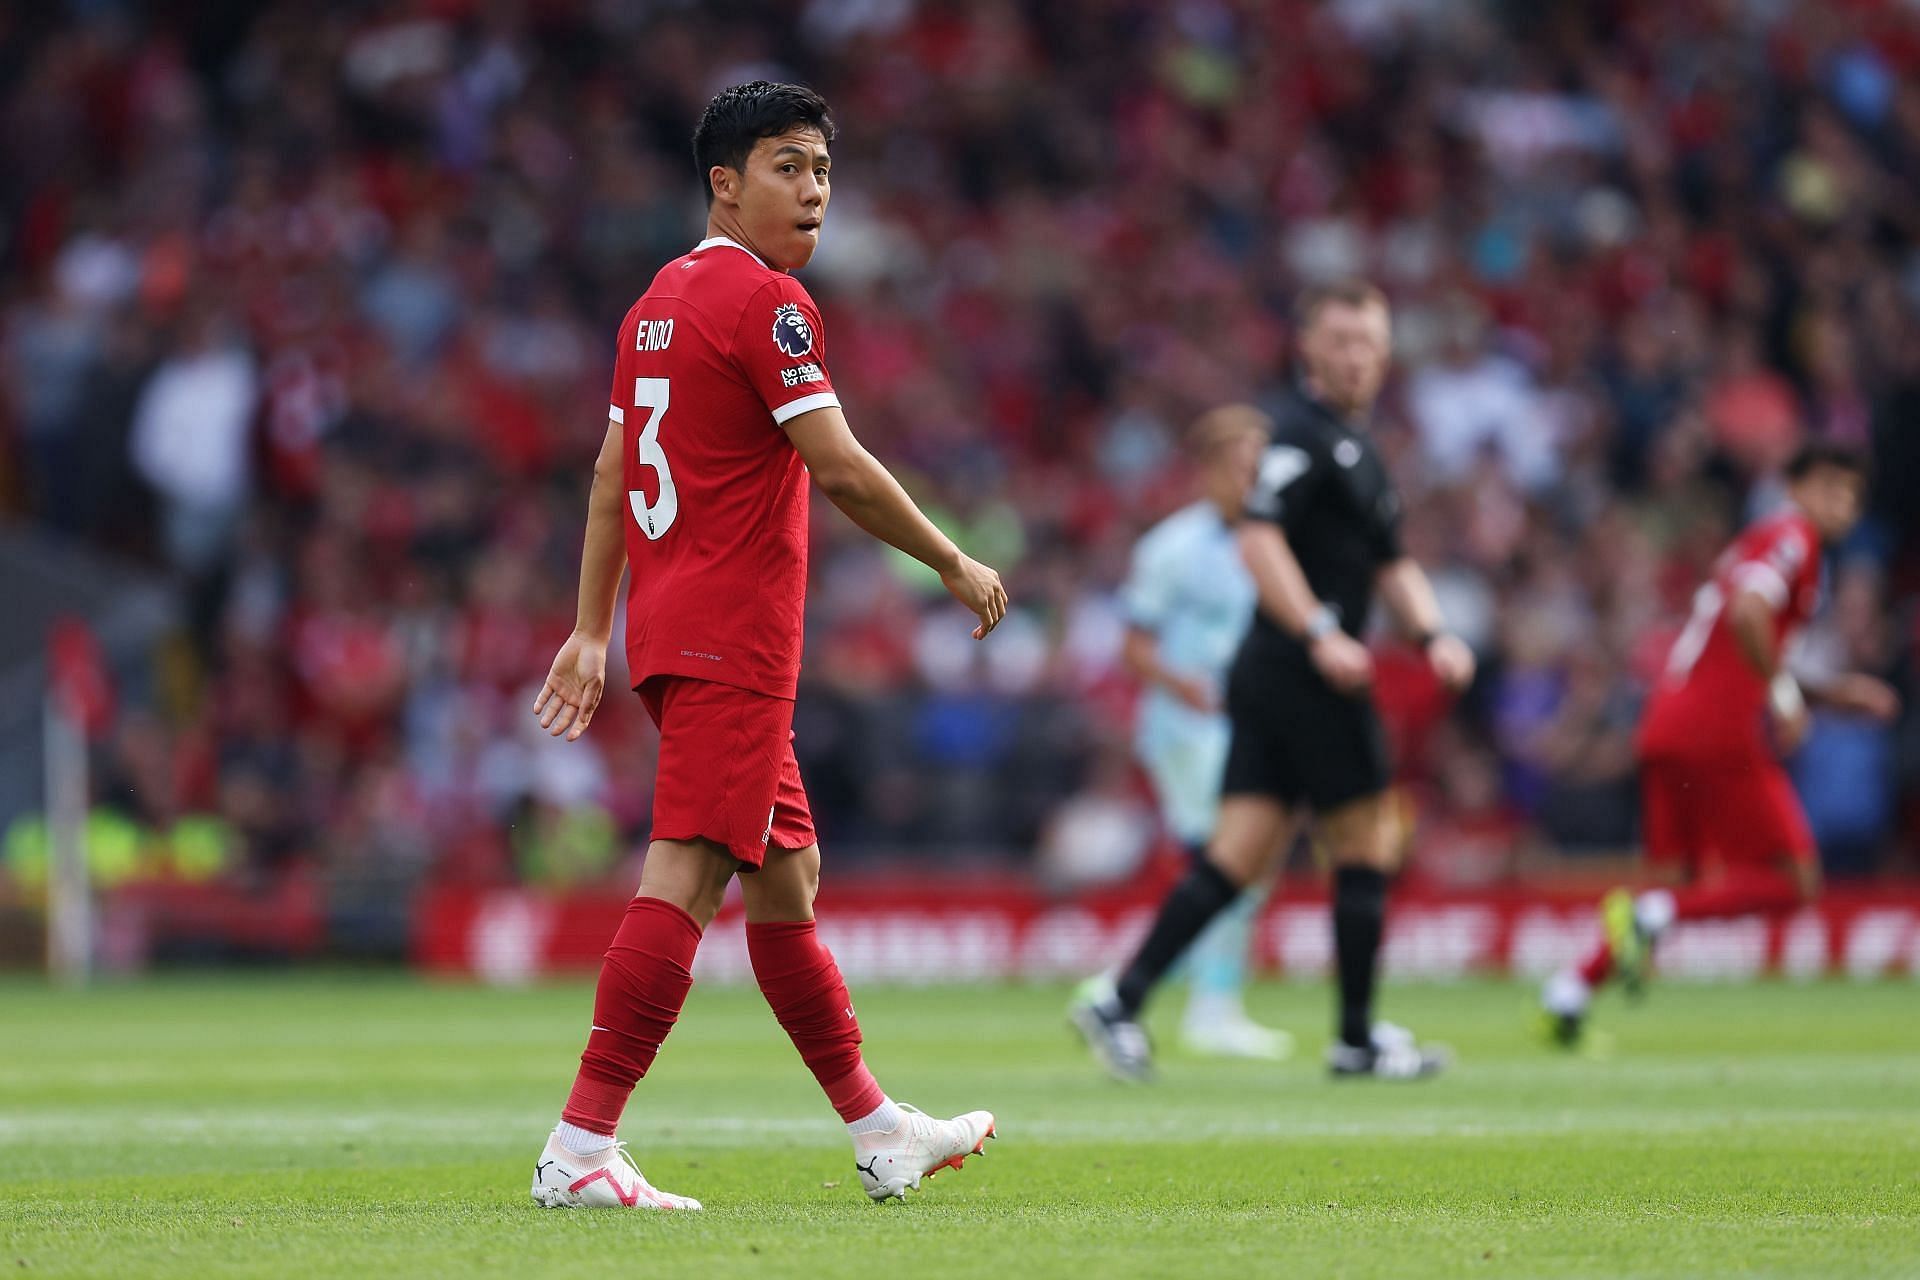 Wataru Endo in his Liverpool debut against Bournemouth on Saturday.